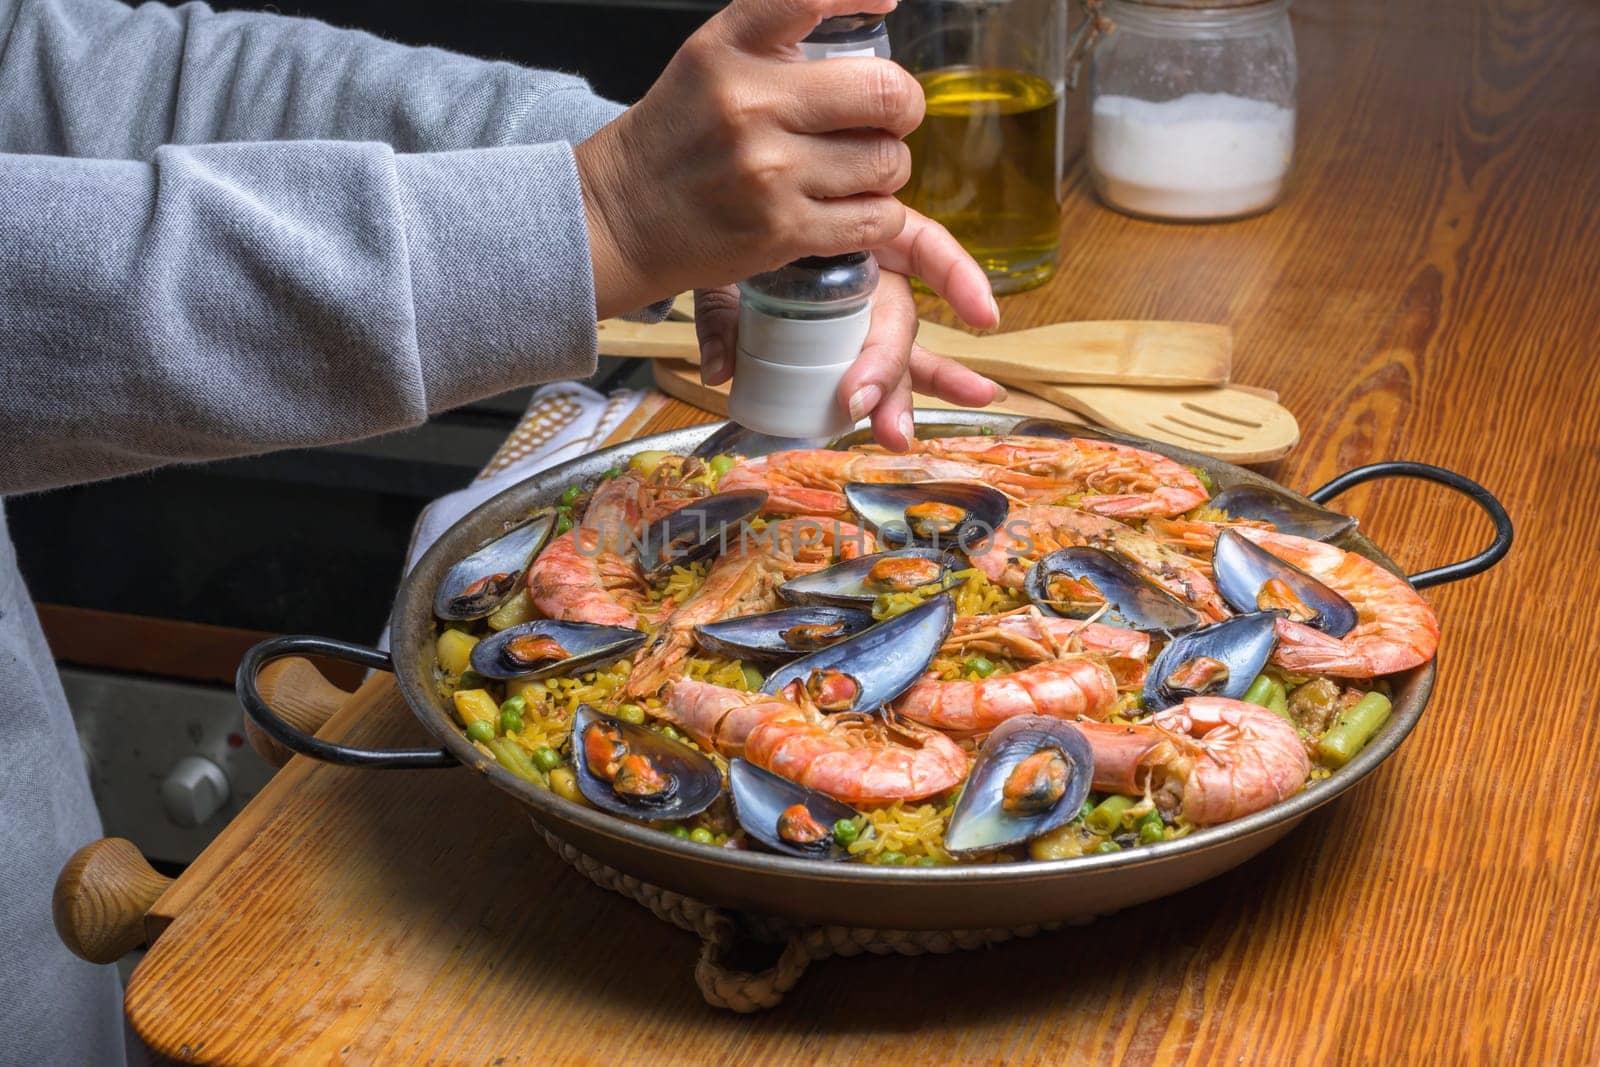 Person seasoning a paella with prawns and mussels, evoking home cooking, typical Spanish cuisine, Majorca, Balearic Islands, Spain by carlosviv